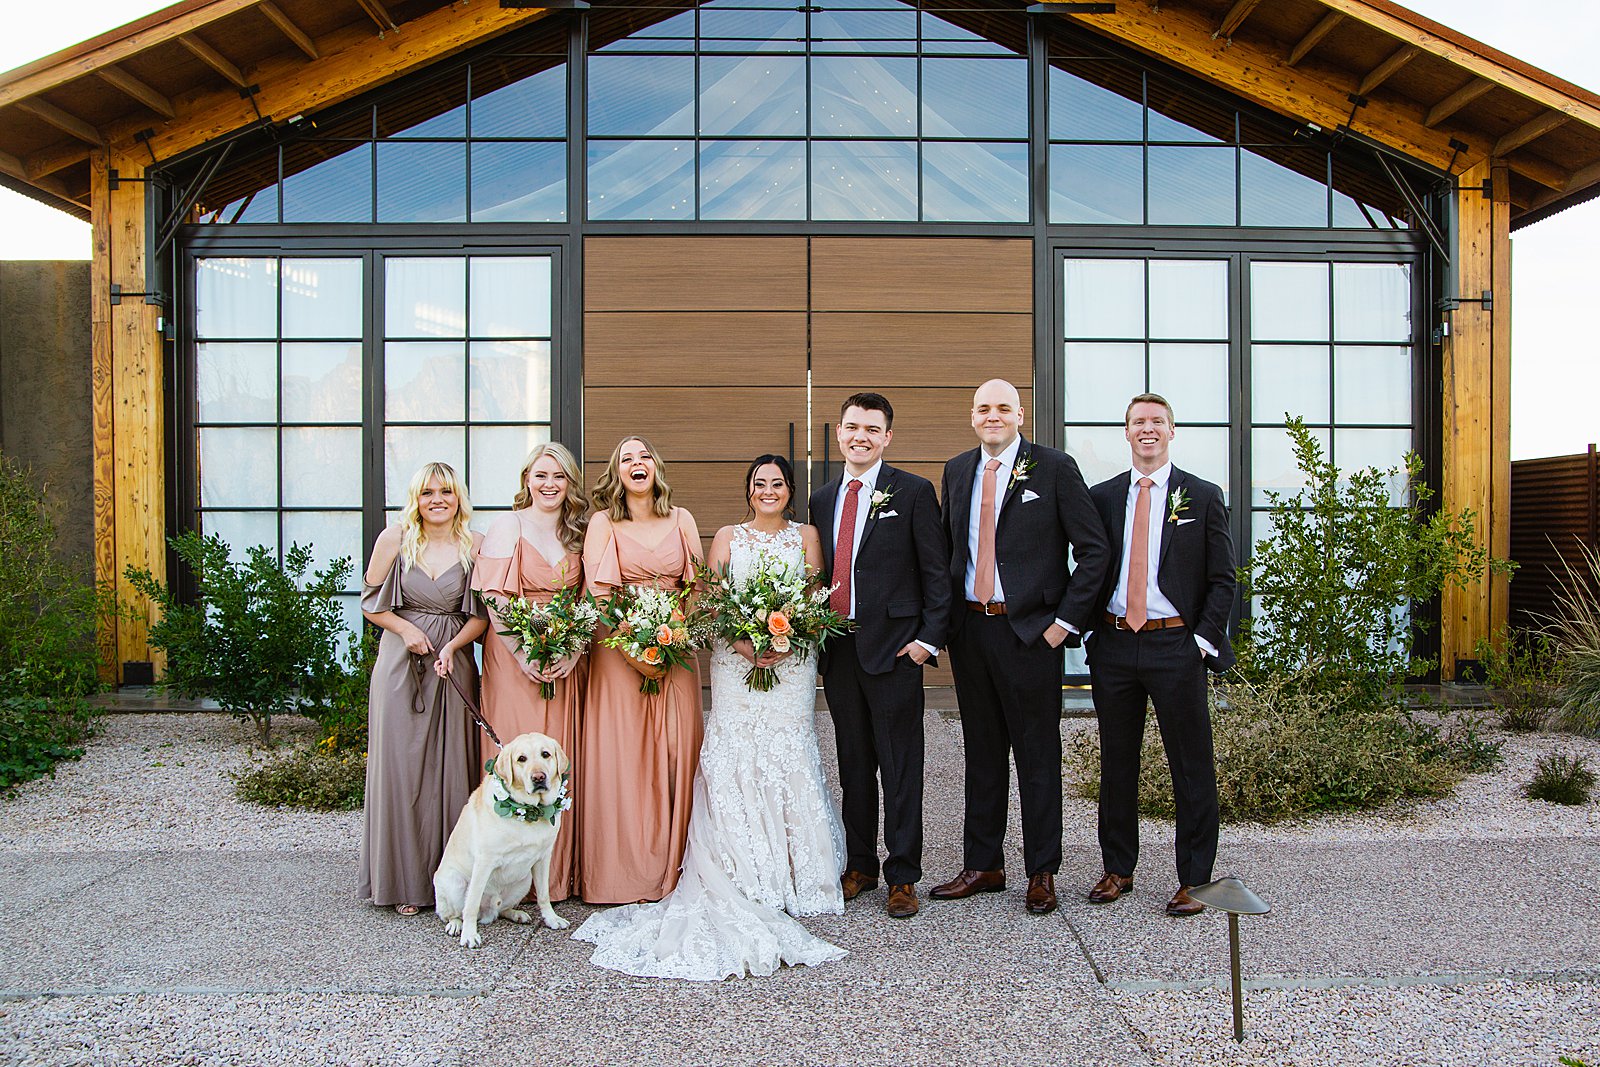 Bridal party together at a The Paseo wedding by Arizona wedding photographer PMA Photography.